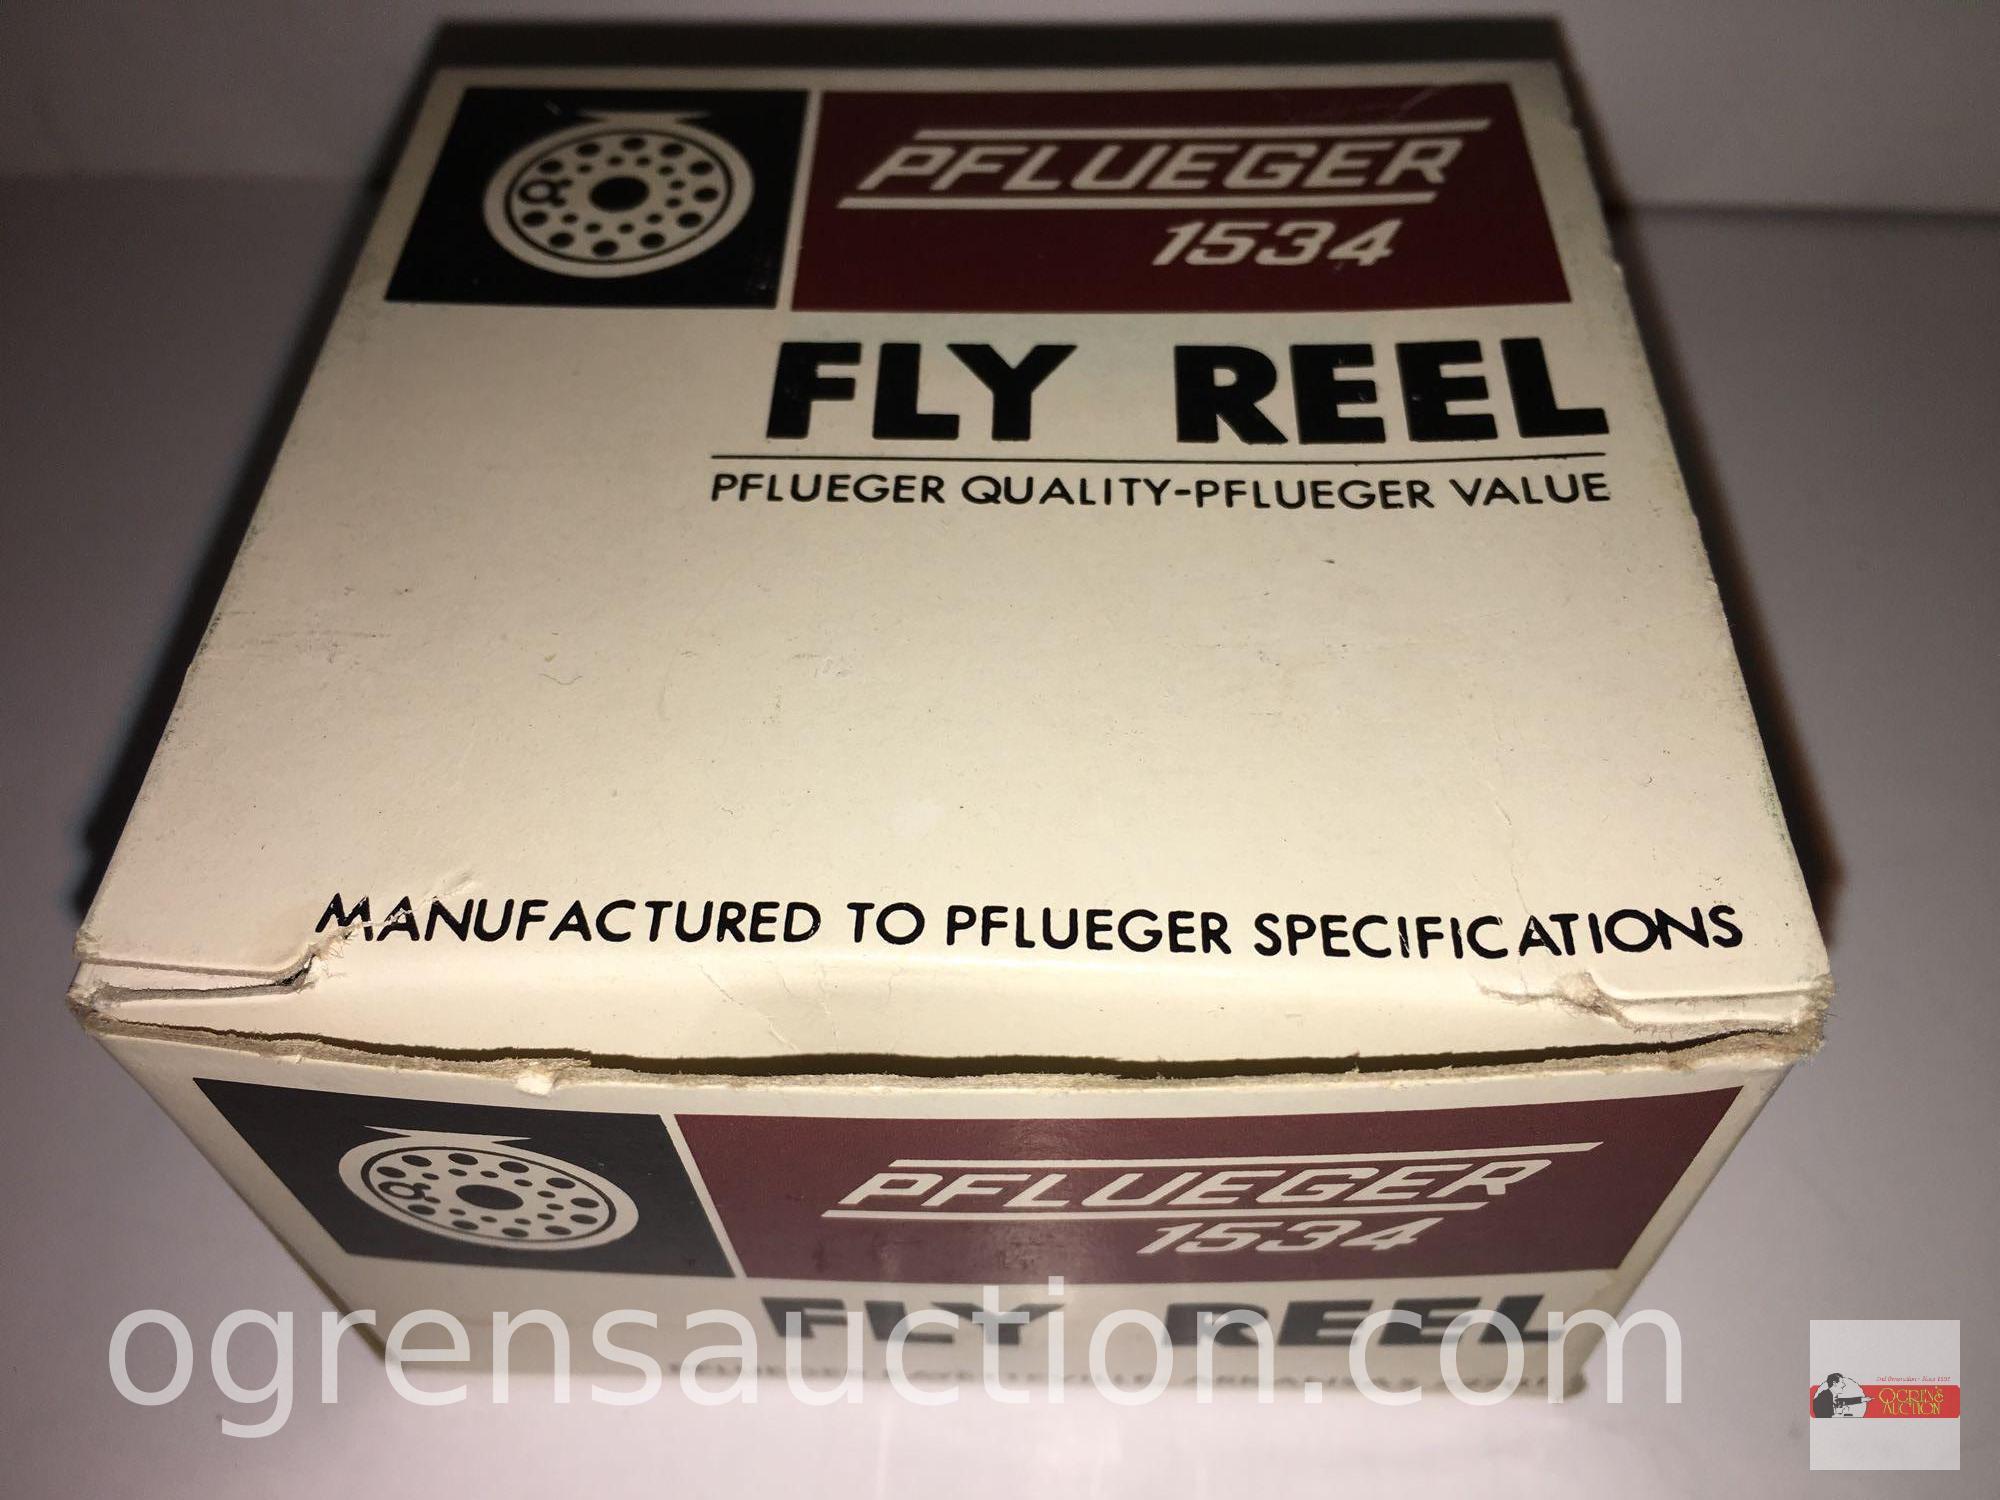 Fishing - Reels - Pflueger 1534 Progress Fly Reel, new old stock in box with paperwork